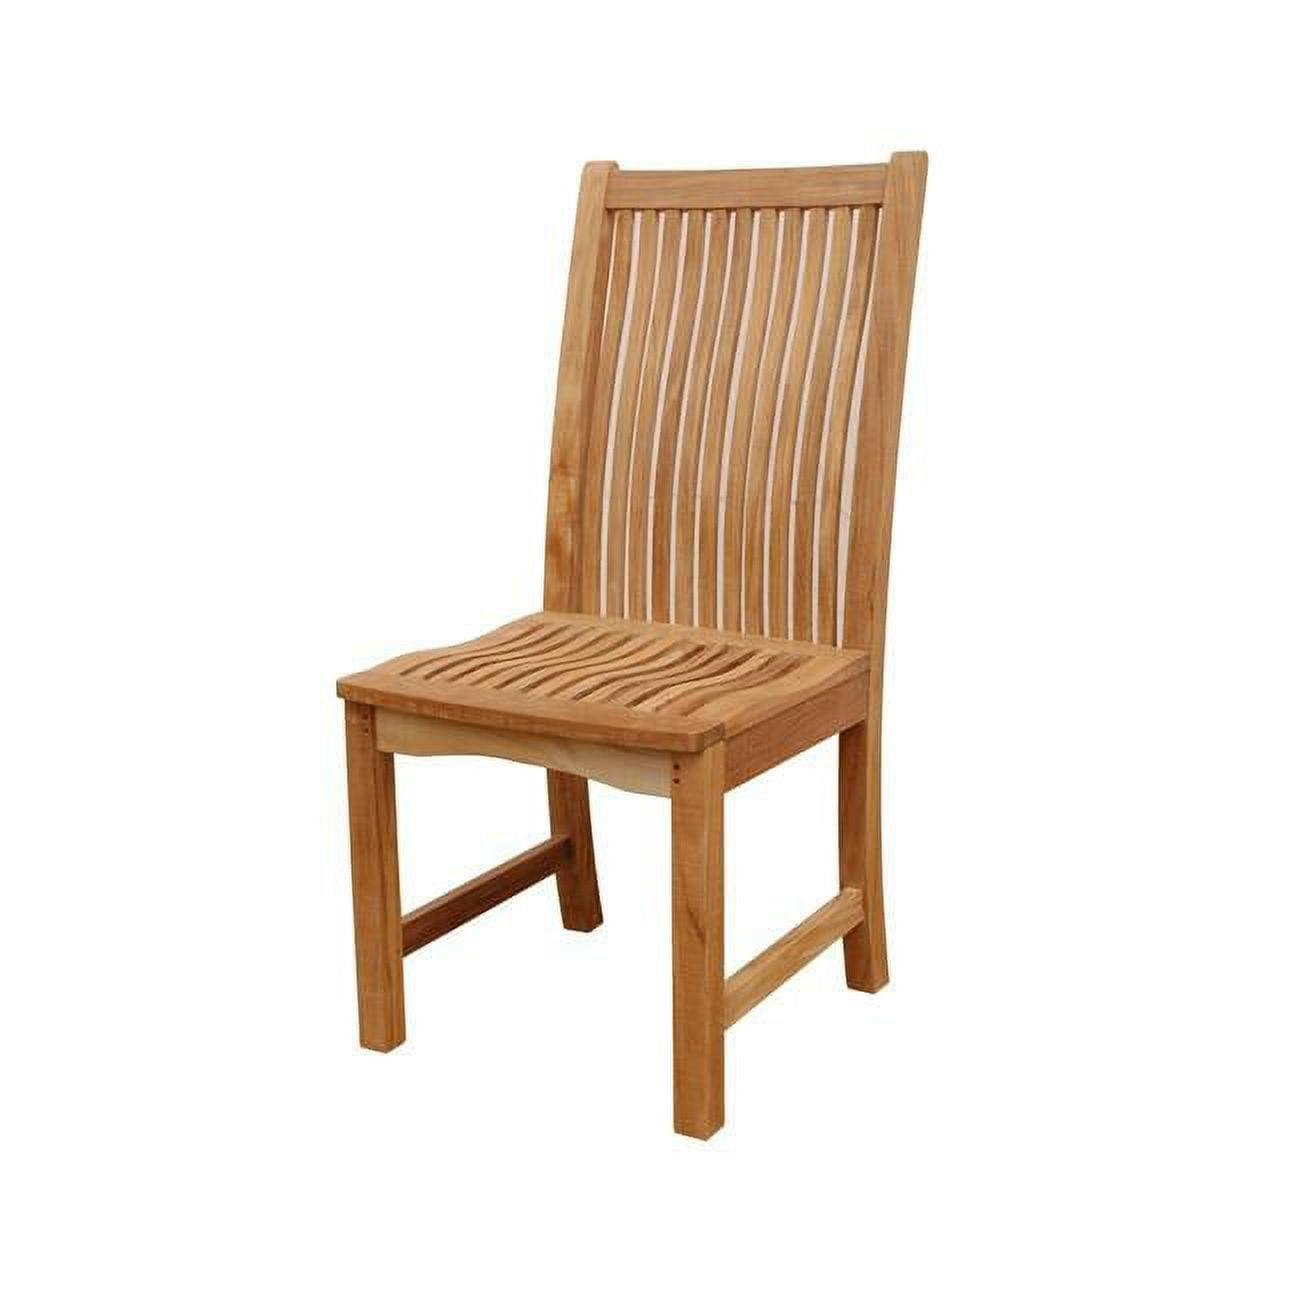 Classic Teak Sculpted Comfort Outdoor Dining Side Chair